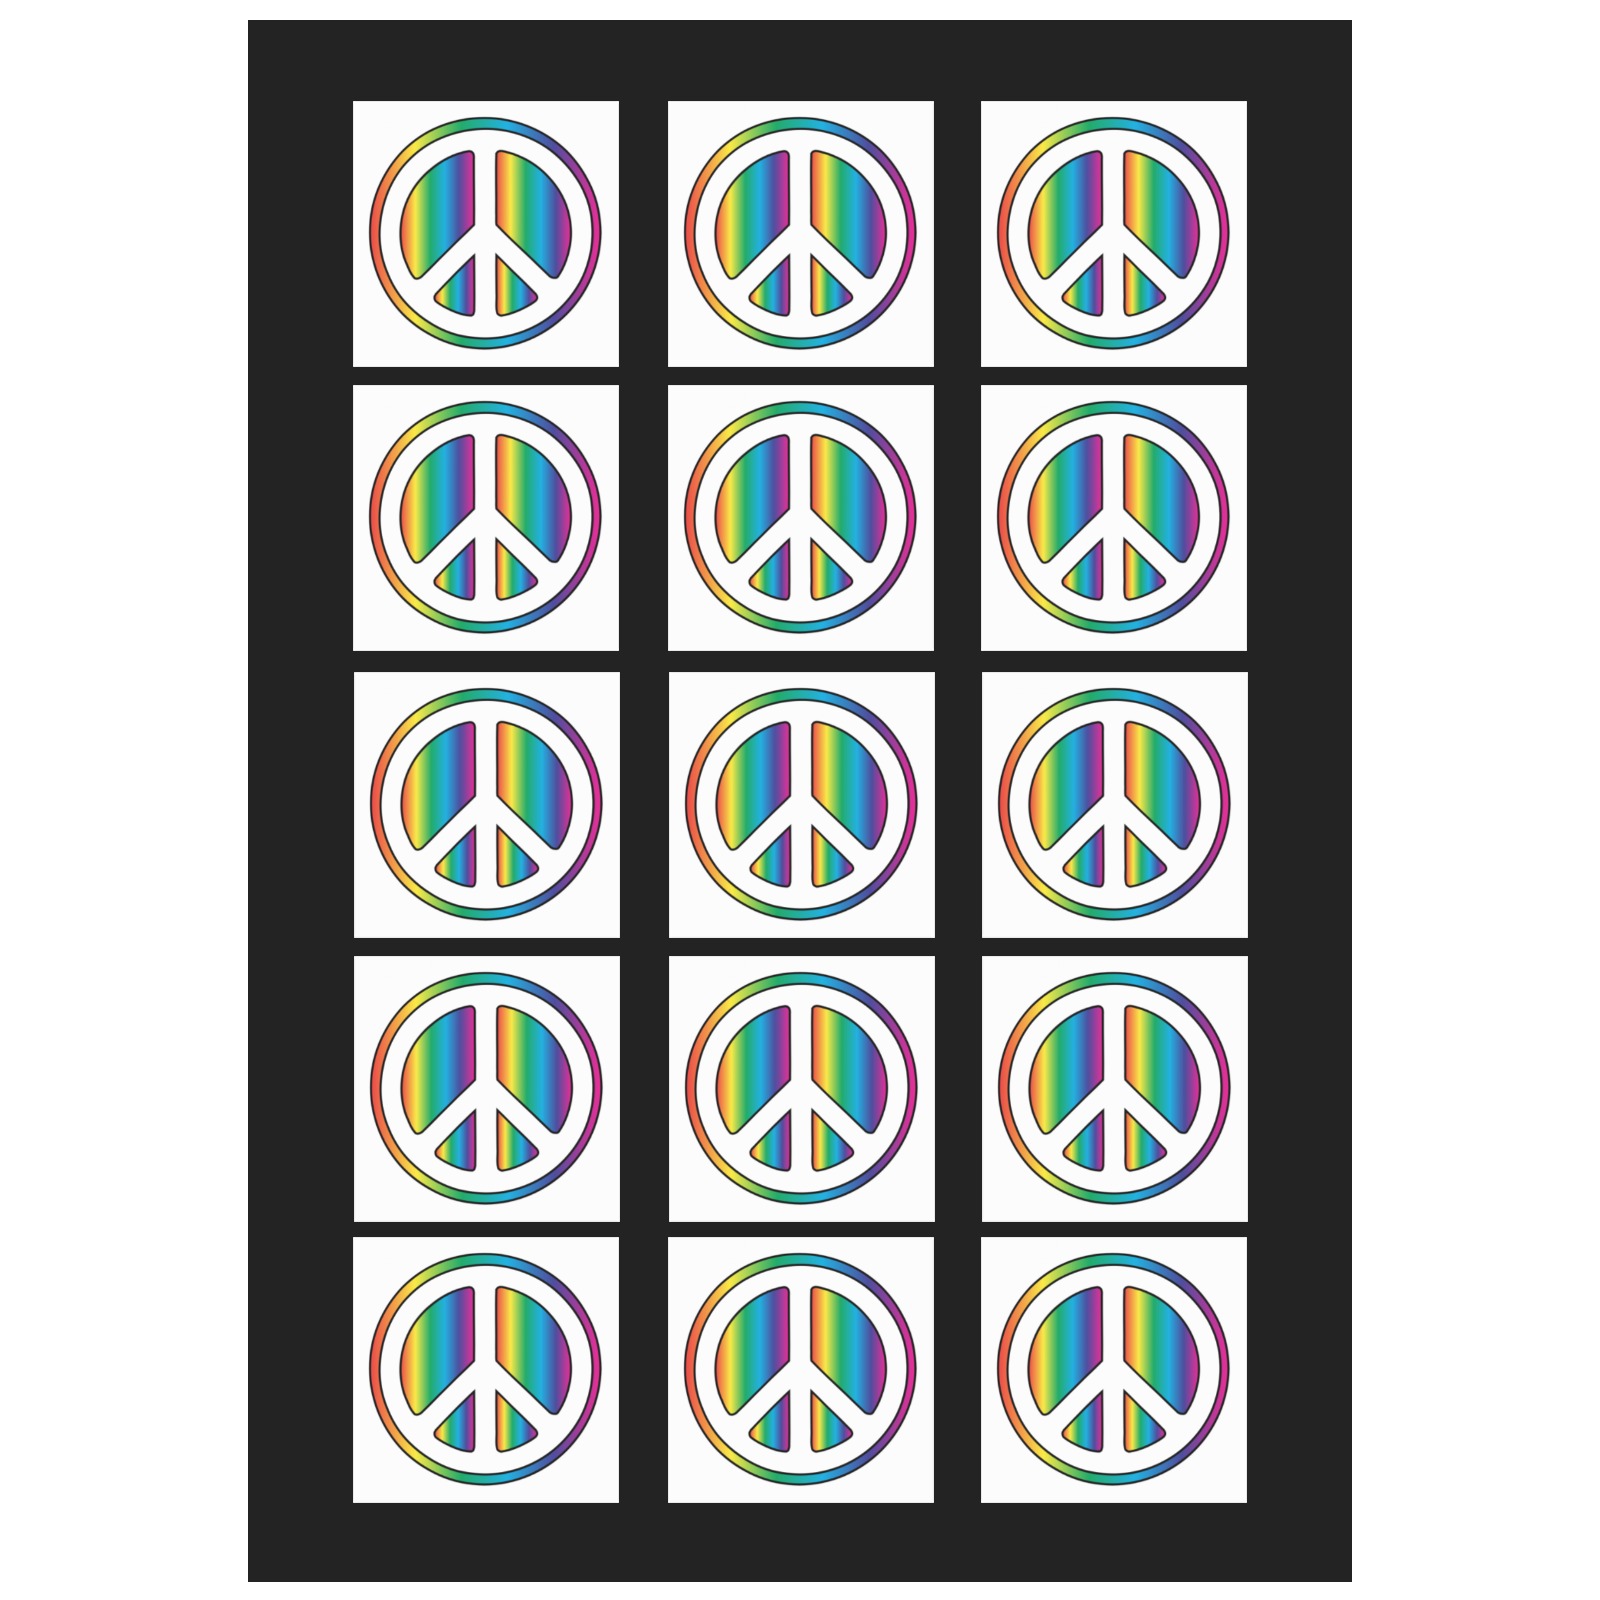 Colorful Peace Symbol Personalized Temporary Tattoo (15 Pieces)